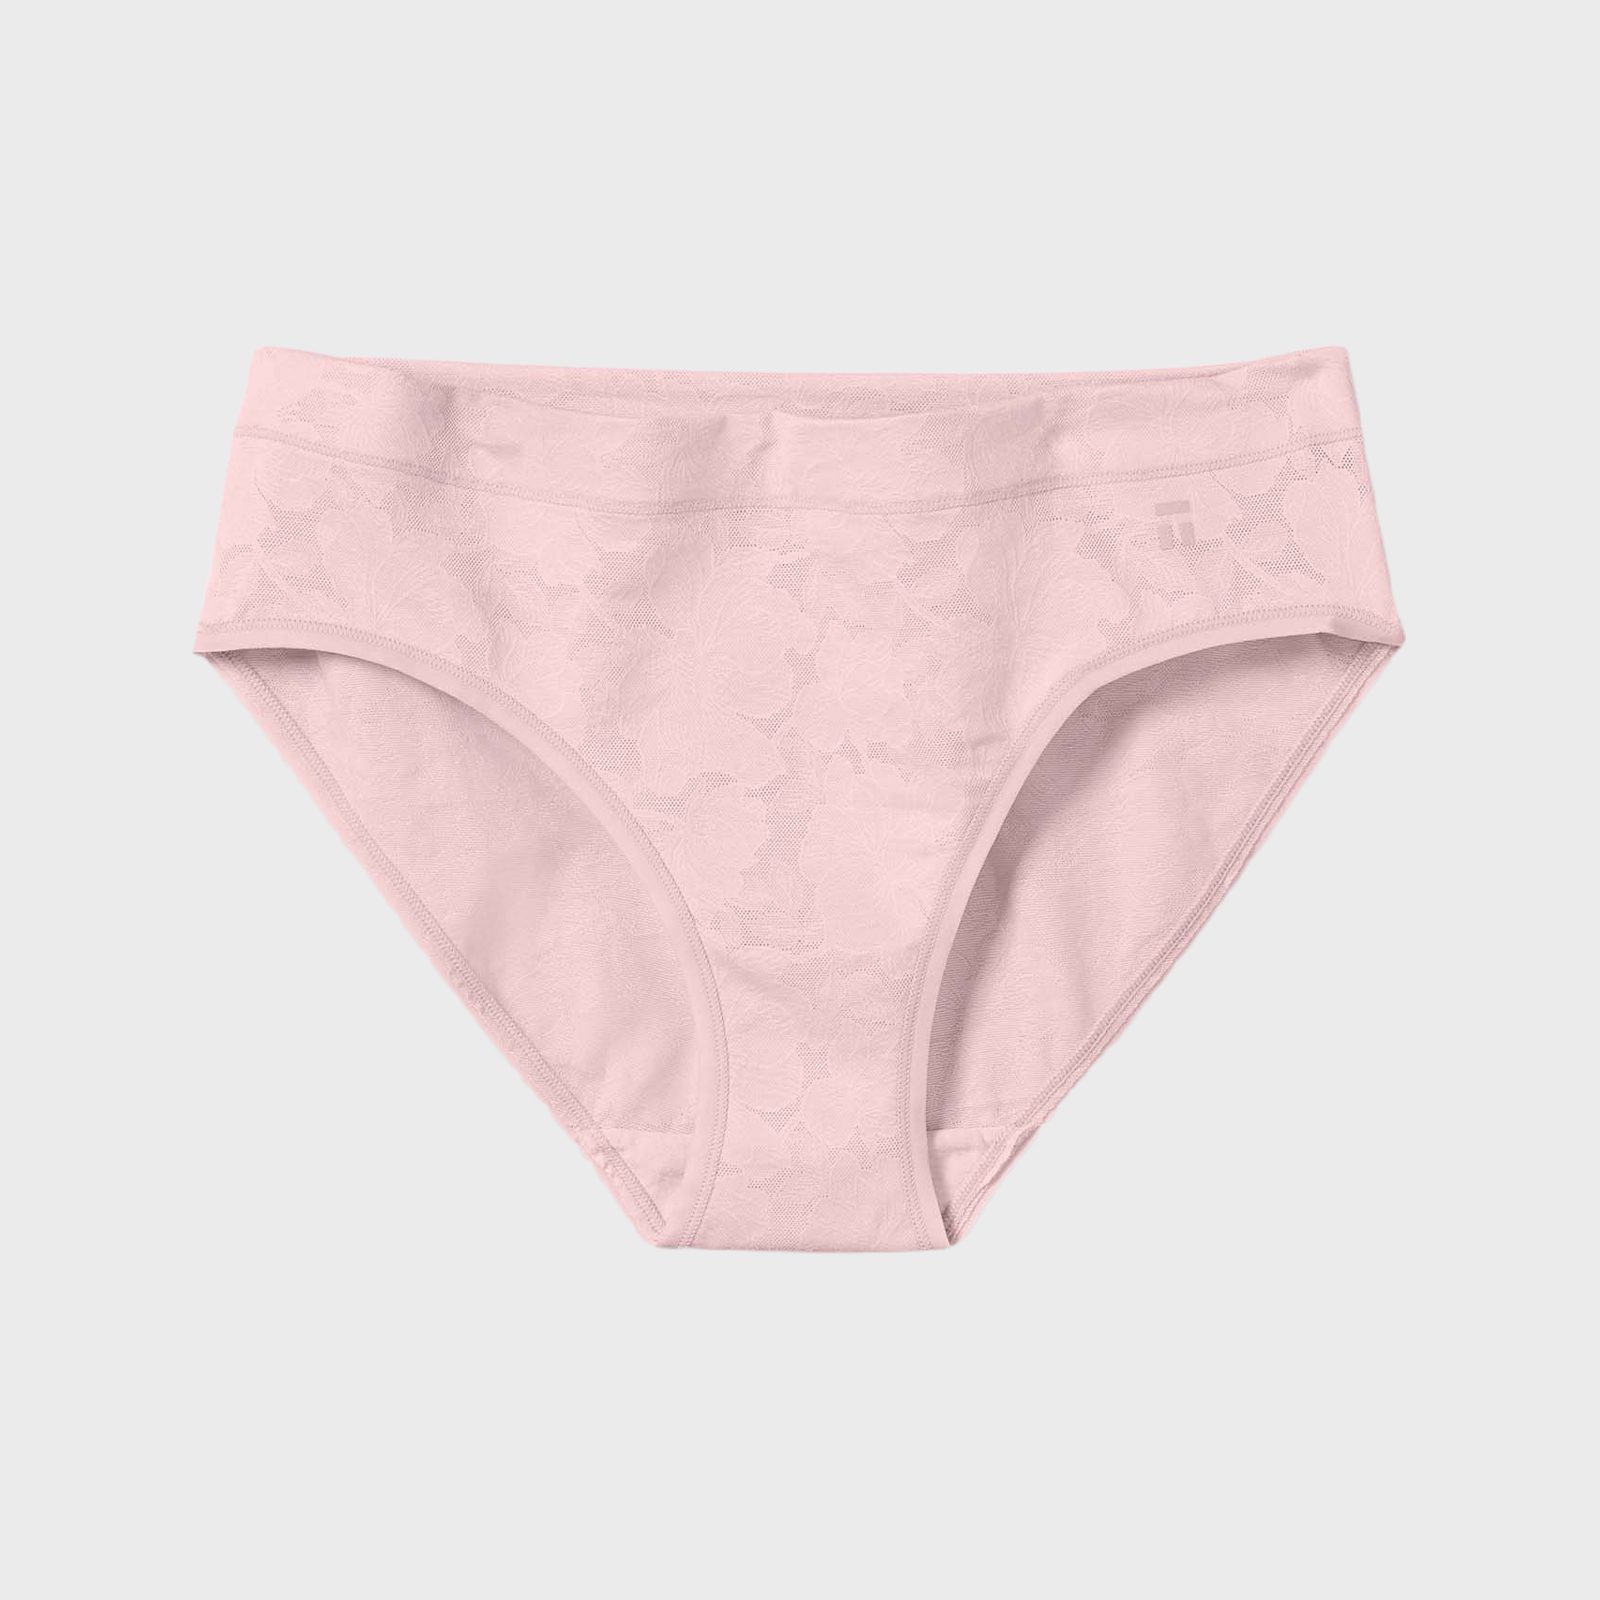 SKIMS - The Cotton String Bikini features a second-skin